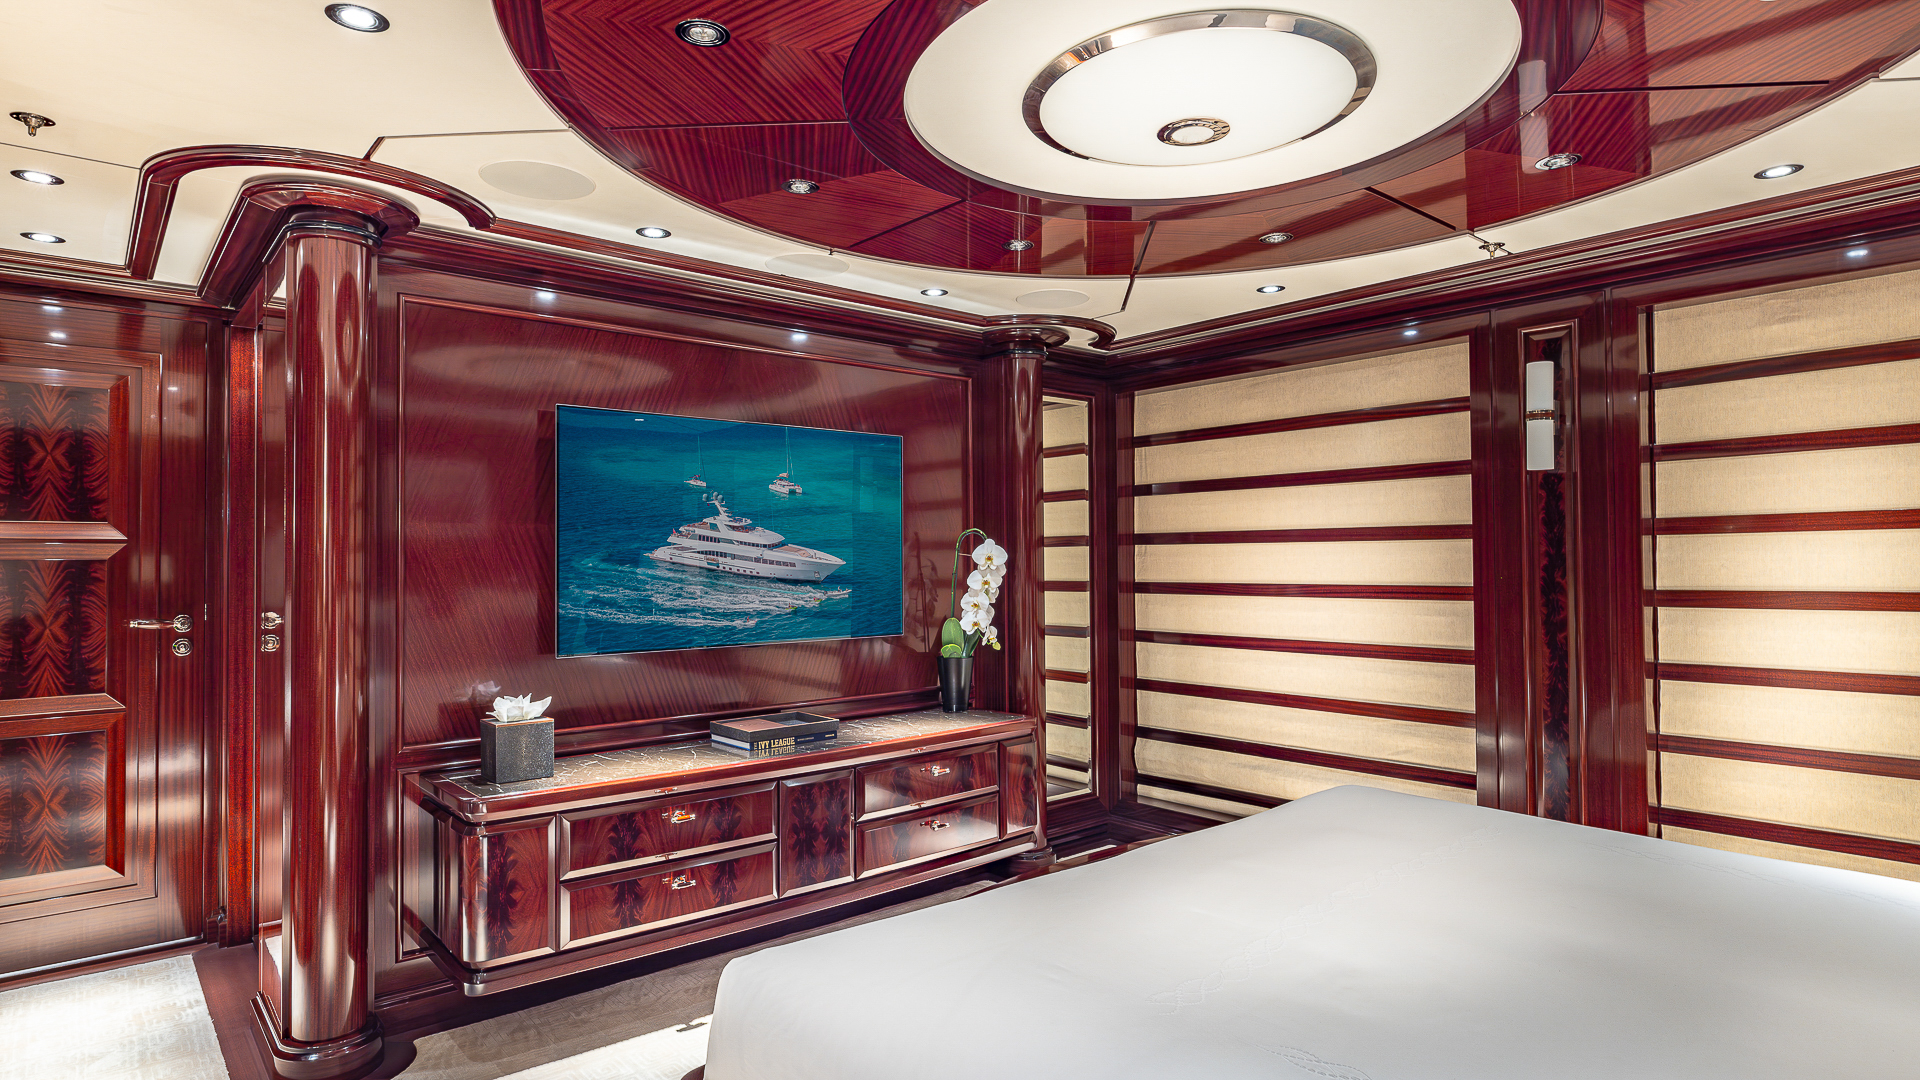 Rock It Master King Suite - Looking Forward Credit Yachting Image